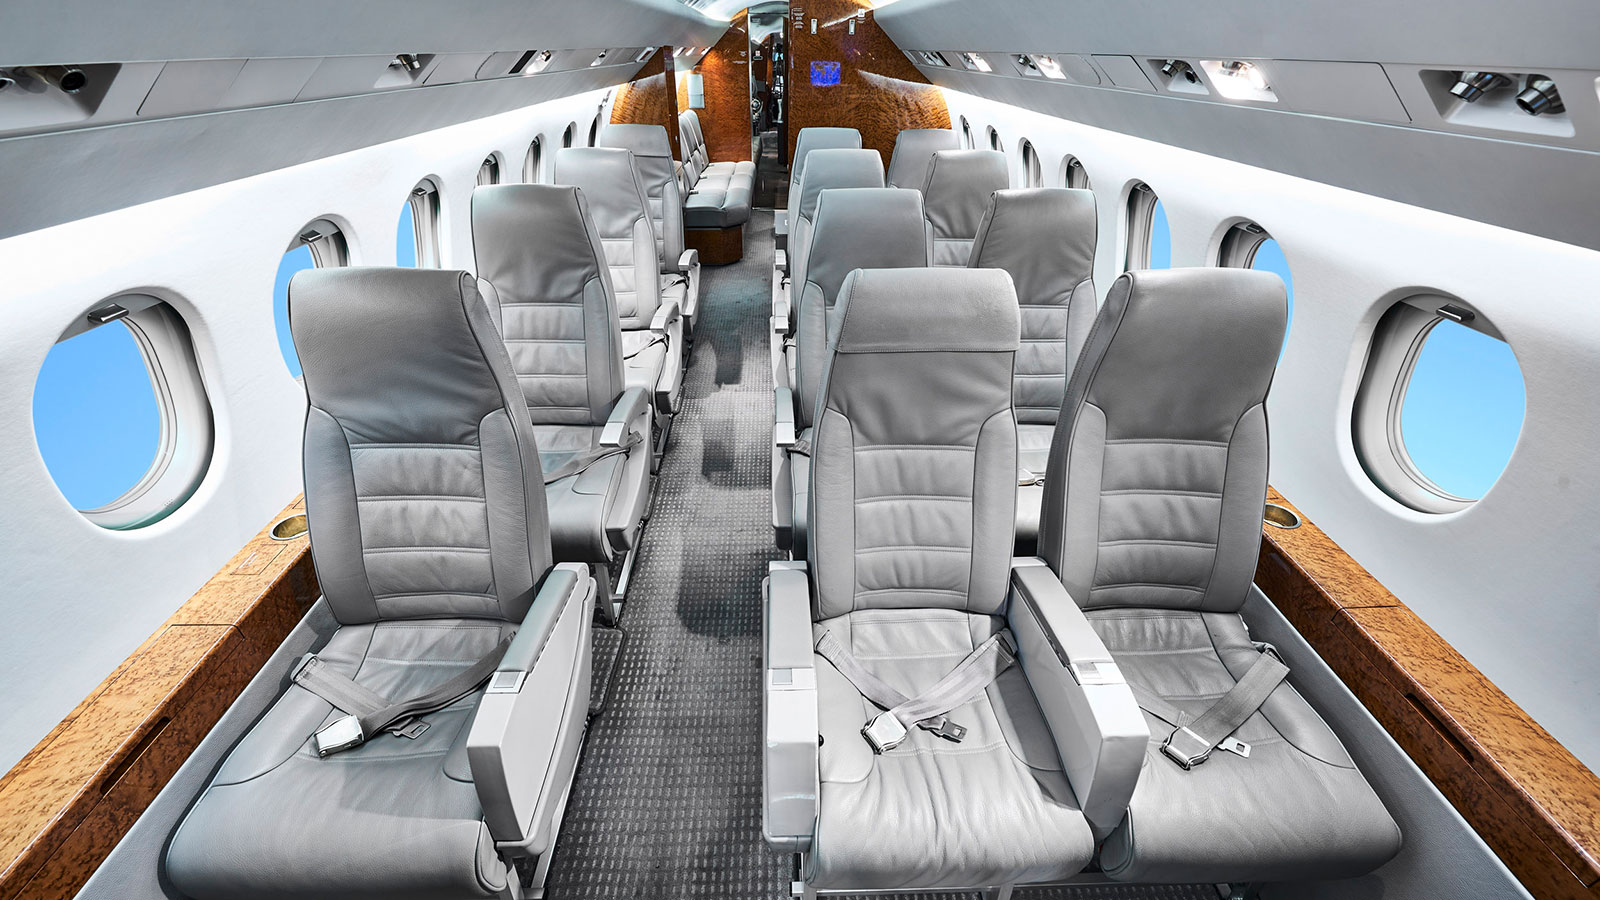 "Corporate Shuttle" seating configuration | Aero-Dienst Aircraft Sales